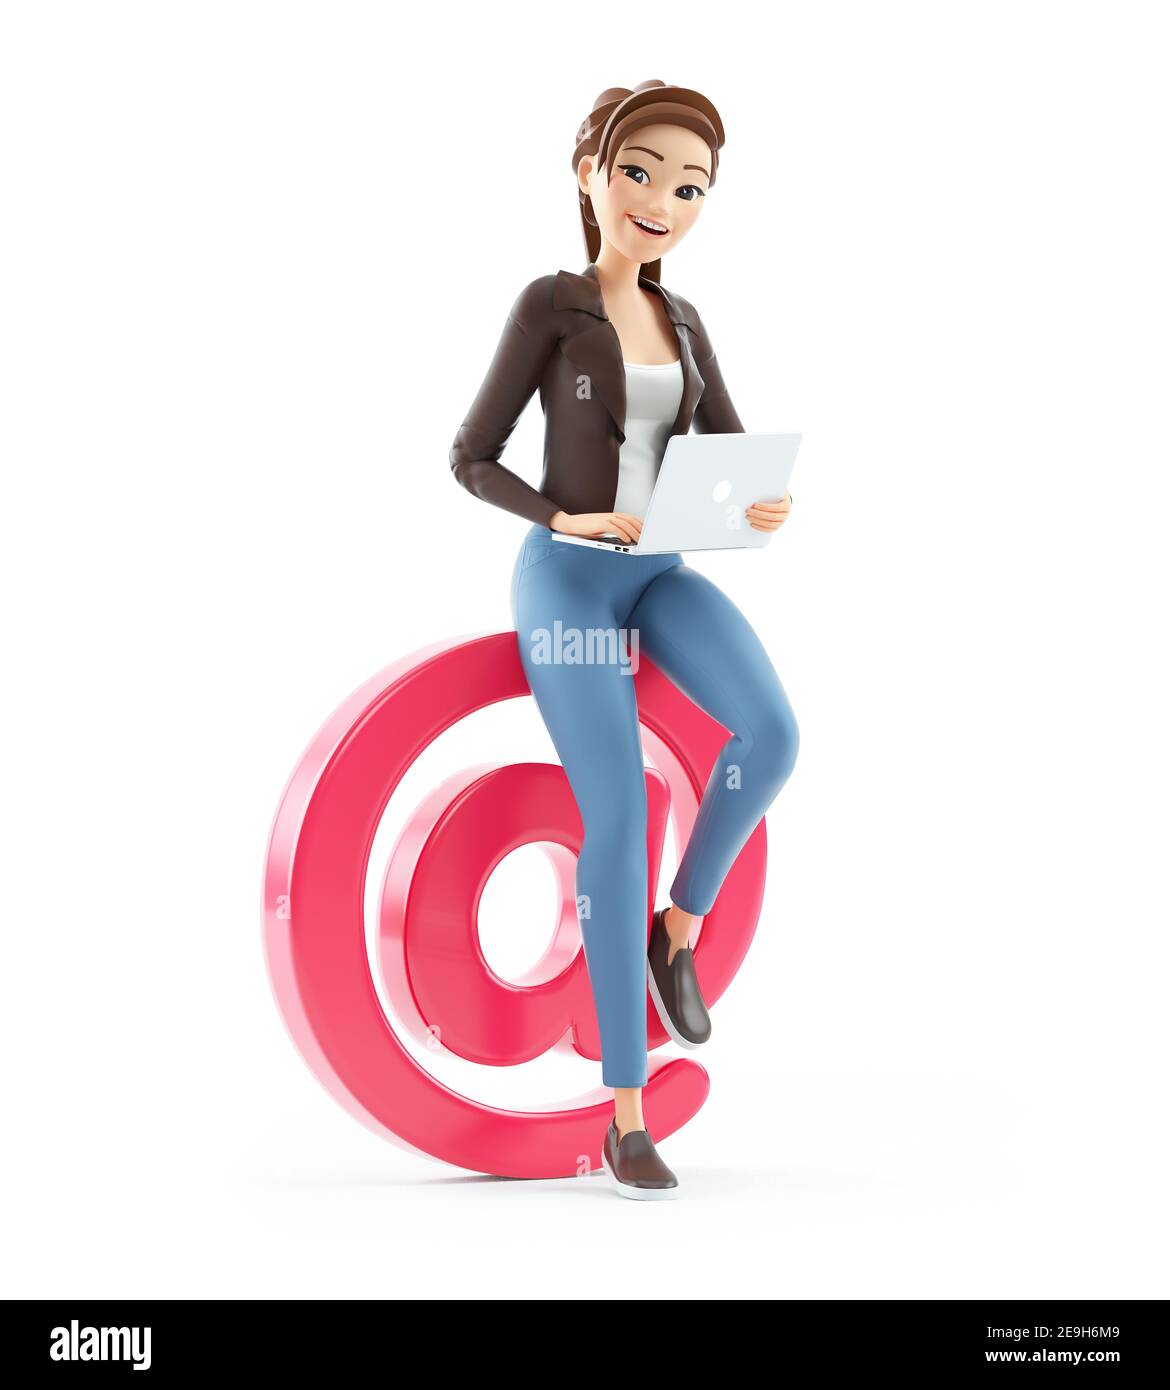 3d cartoon woman working on at sign, illustration isolated on white background Stock Photo